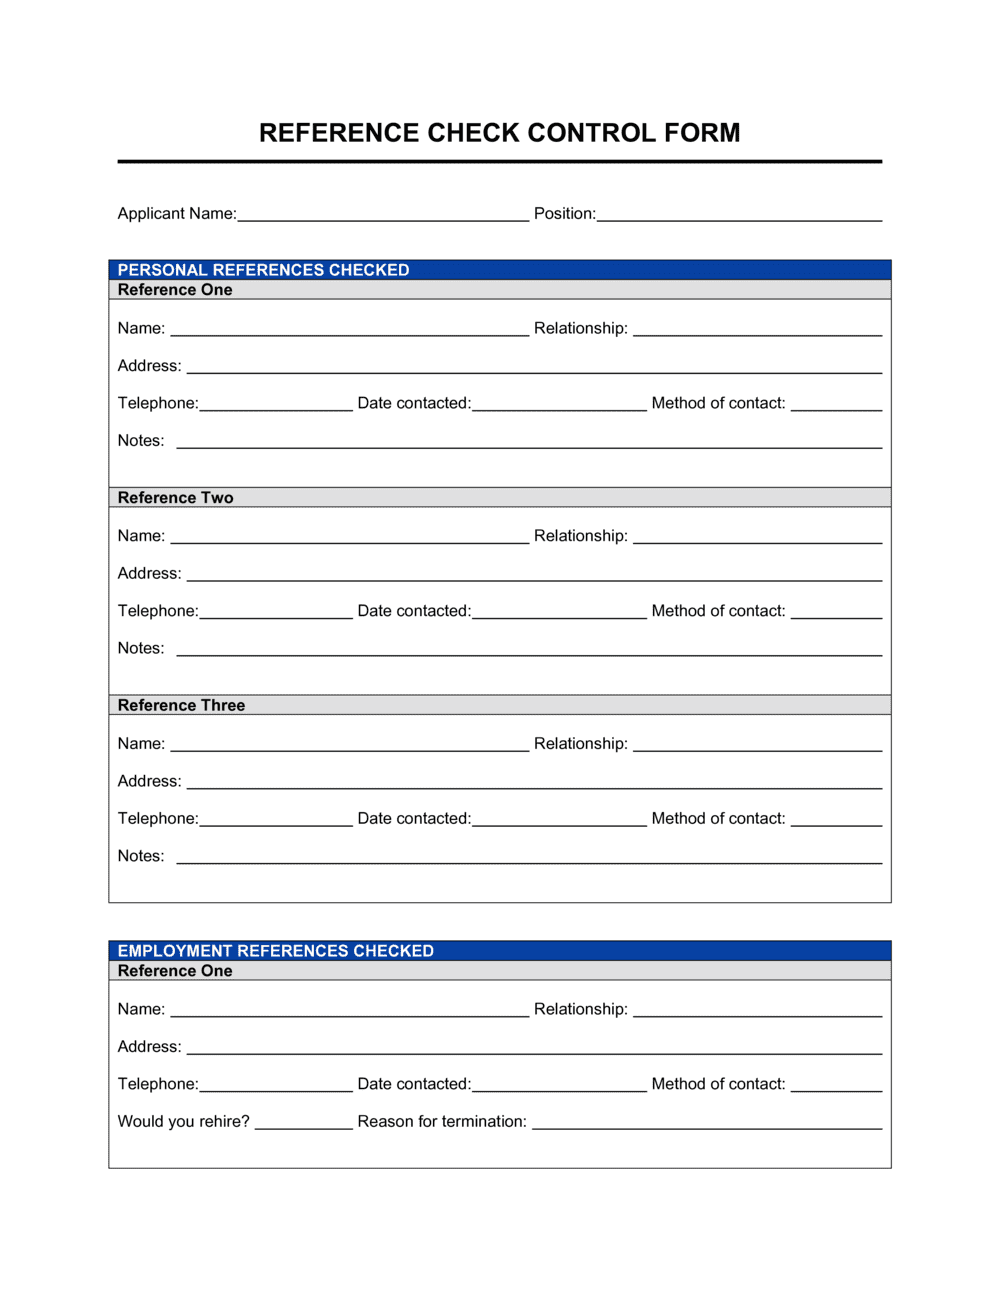 Reference Checking Form Template By Business in a Box 